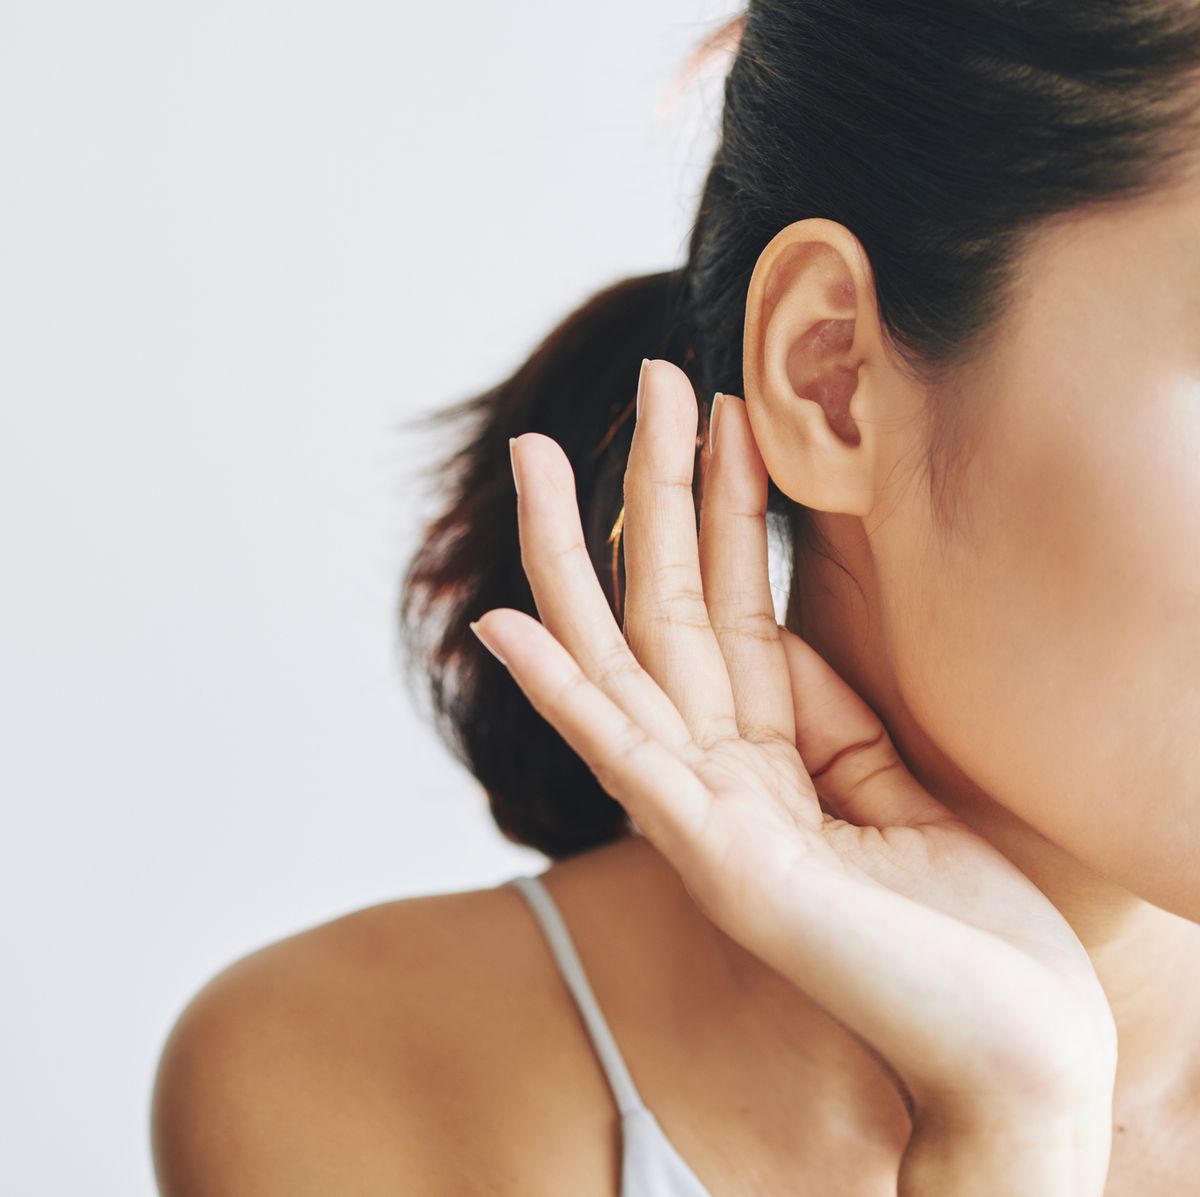 Nat Demonstreer Elke week Why Are My Ears Ringing? - 9 Tinnitus Causes and How to Treat It